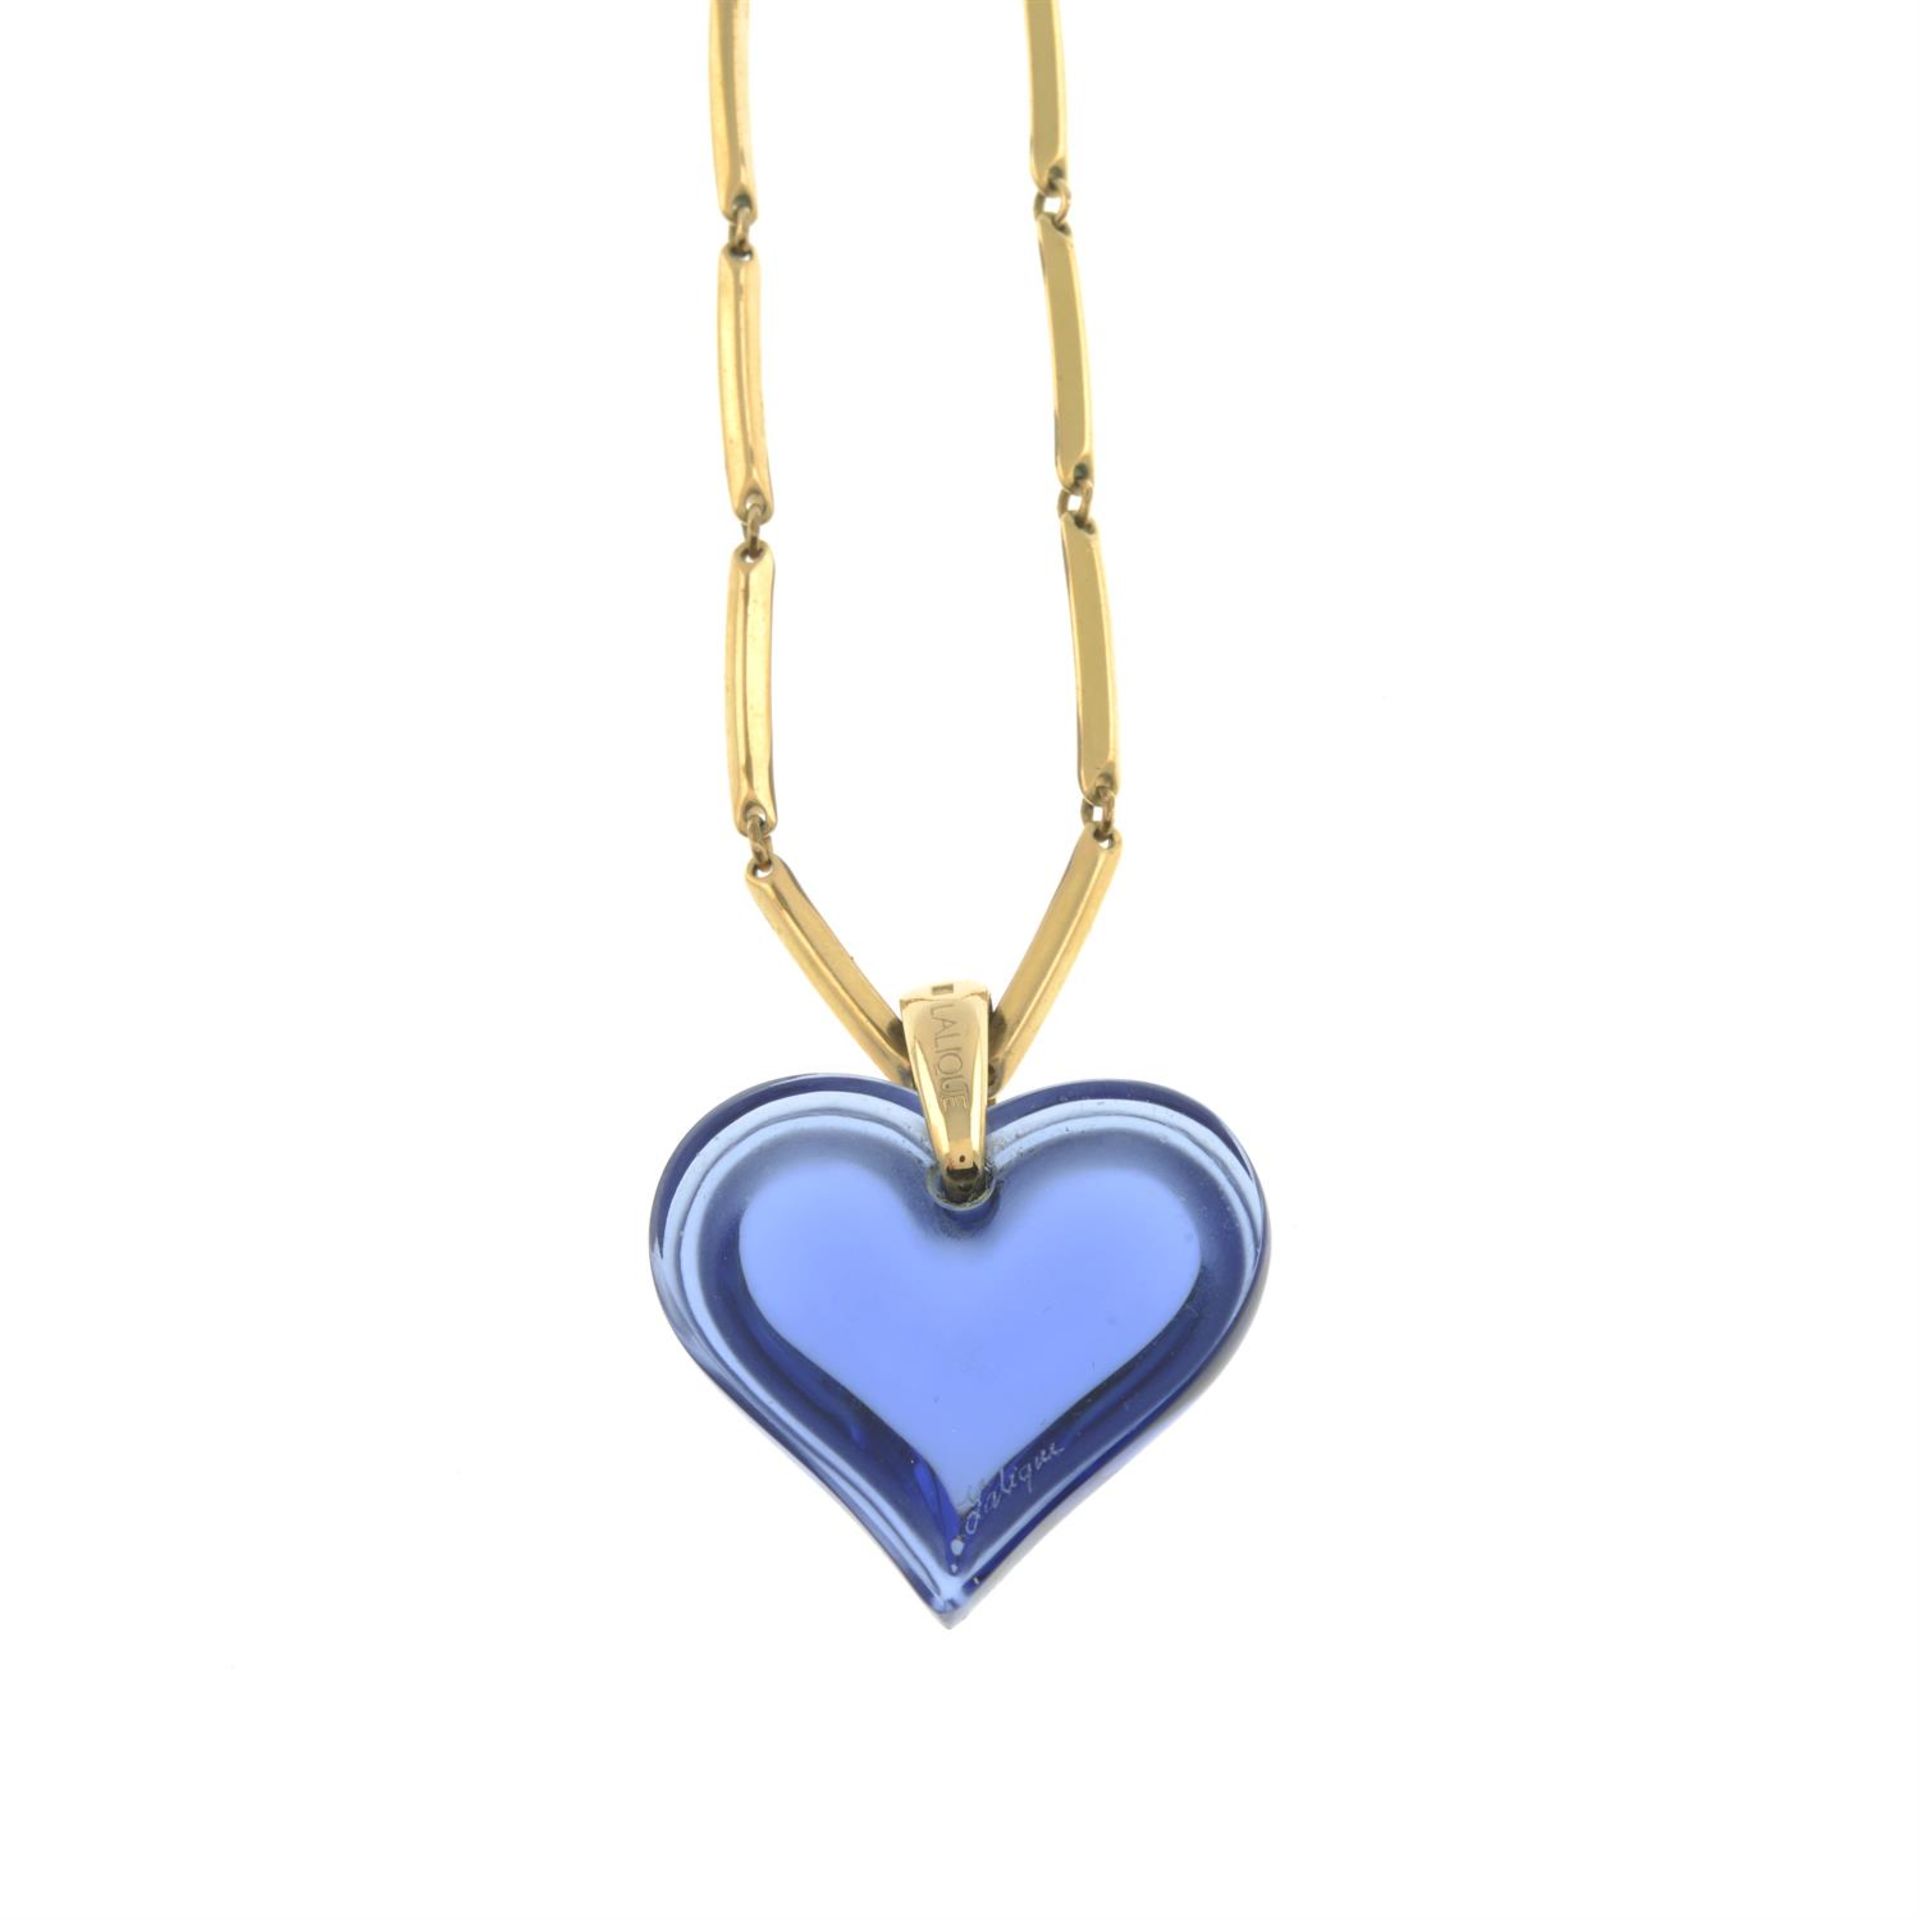 Blue paste heart pendant, with chain, by Lalique - Image 2 of 3